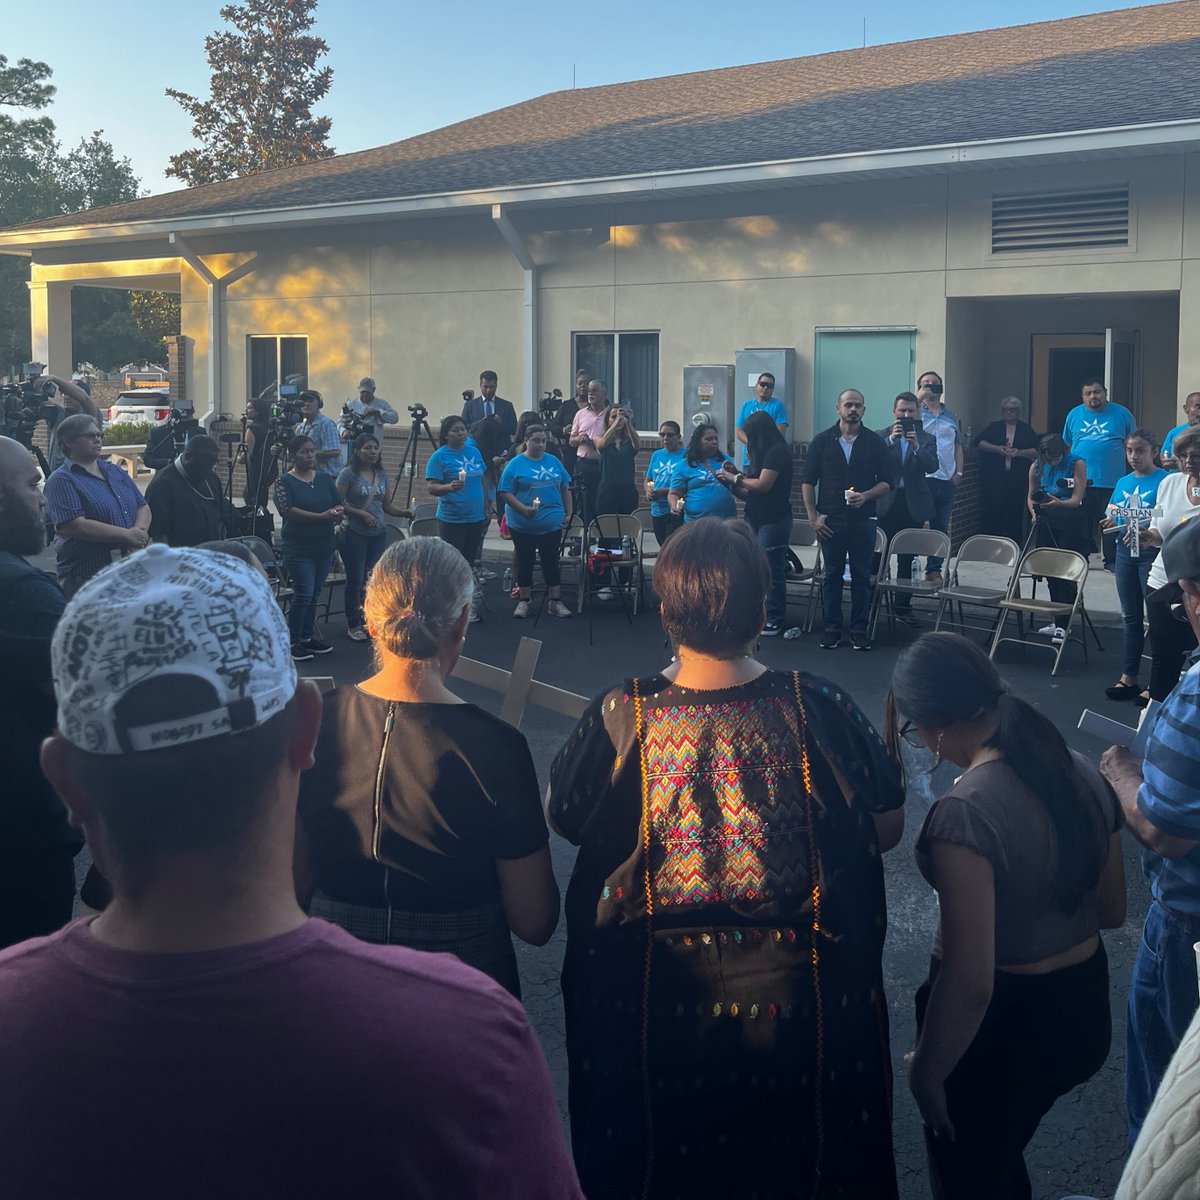 We are deeply grateful for your support, prayers, and comforting words for the individuals involved in the accident earlier this week. To honor the young men whose lives were tragically taken too soon, a vigil was held in their memory in Apopka.